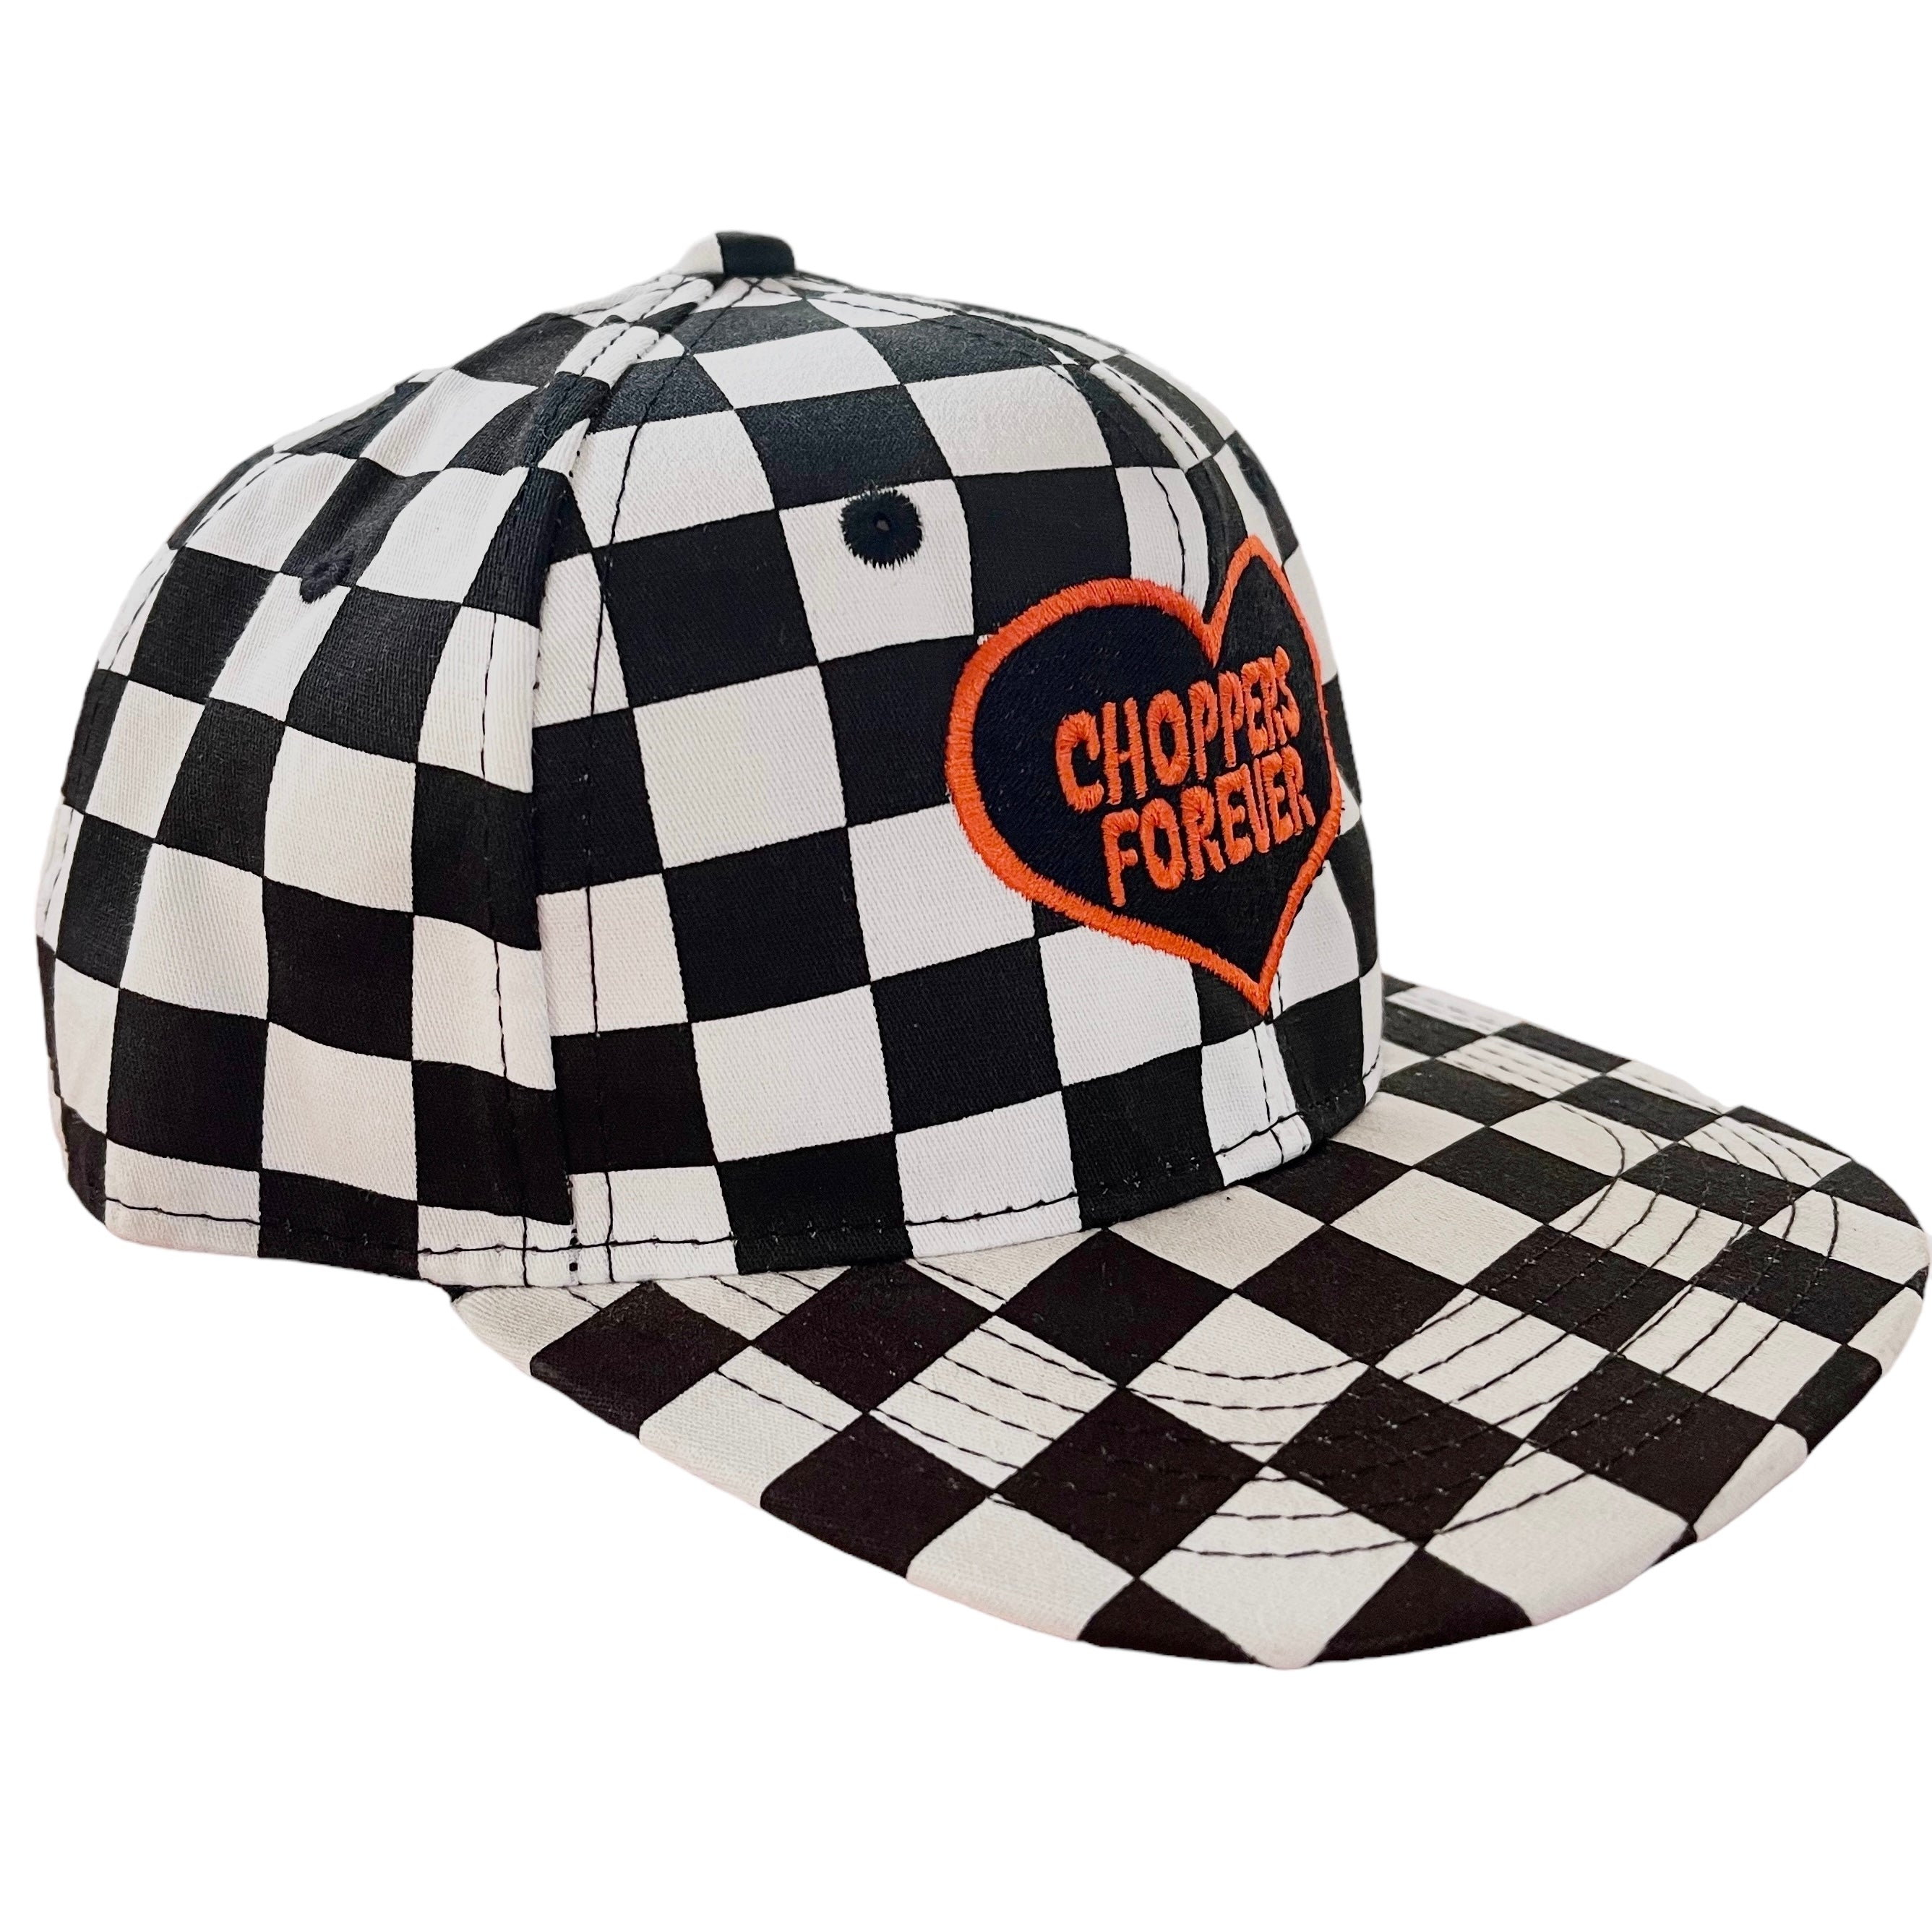 KIDS Choppers Forever Embroidered Checkered Hat